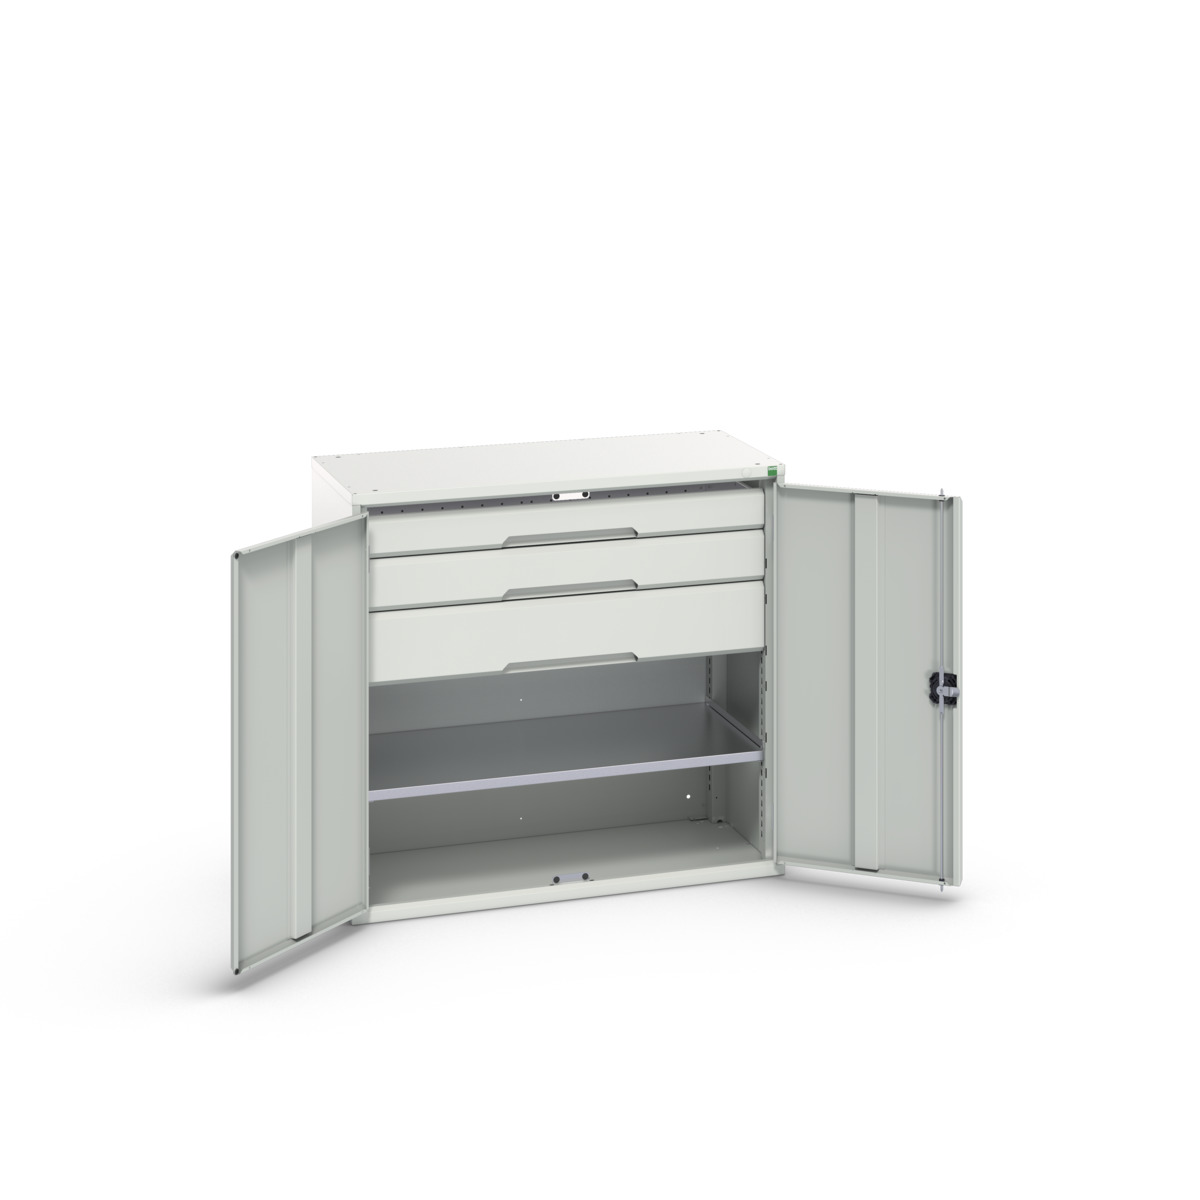 16926554.16 - verso kitted cupboard